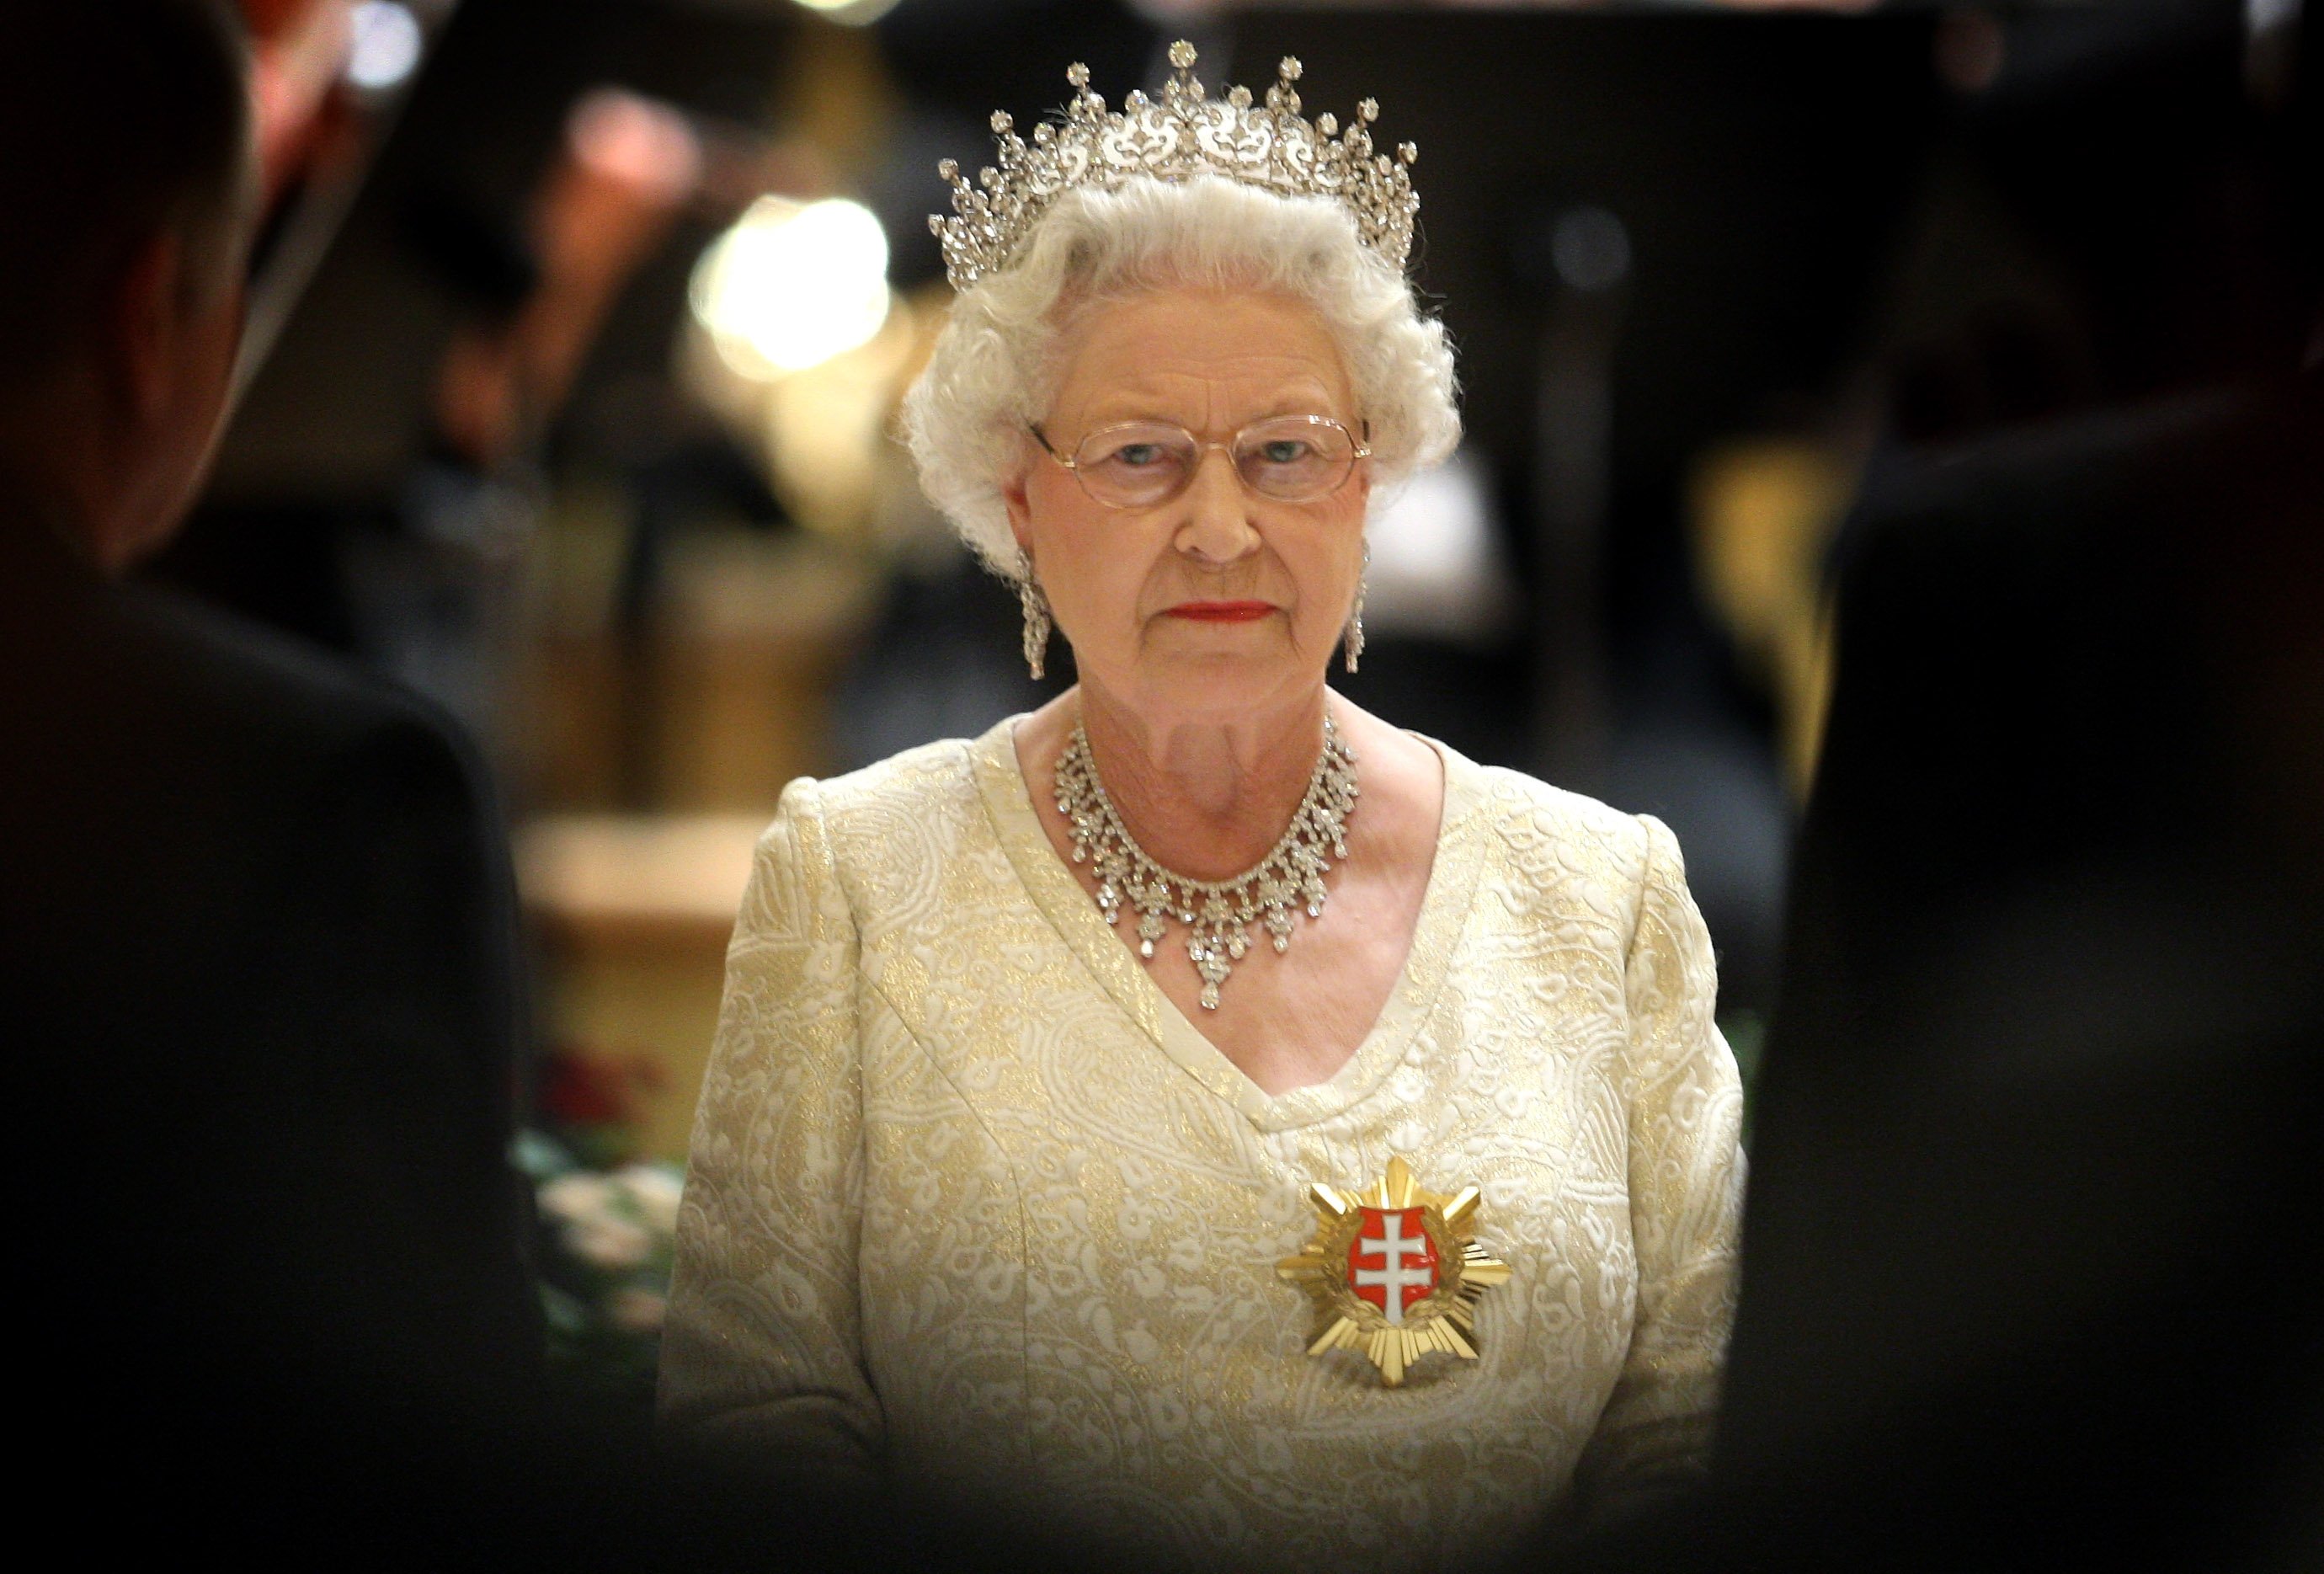 Queen Elizabeth II attends a State Banquet at the Philharmonic Hall on the first day of a tour of Slovakia on October 23, 2008 in Bratislava, Slovakia. | Photo: GettyImages